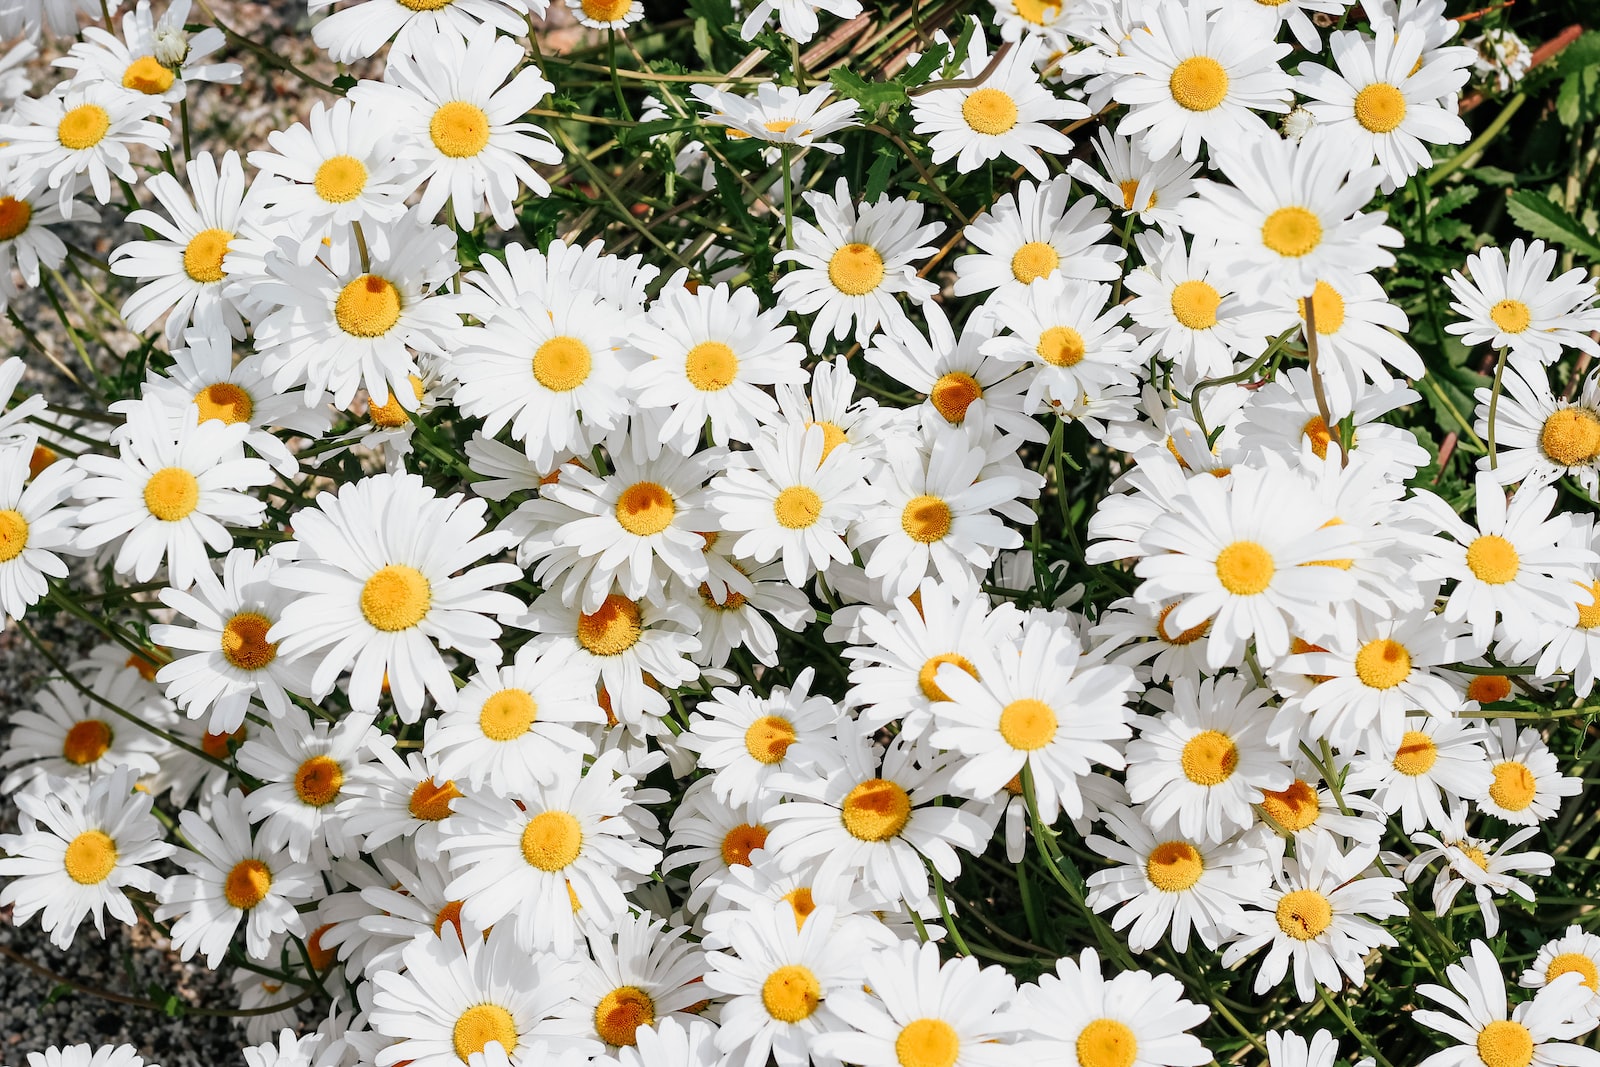 Daisy Flower: Meaning, Properties, and Uses of a Symbol of Innocence and Purity 1